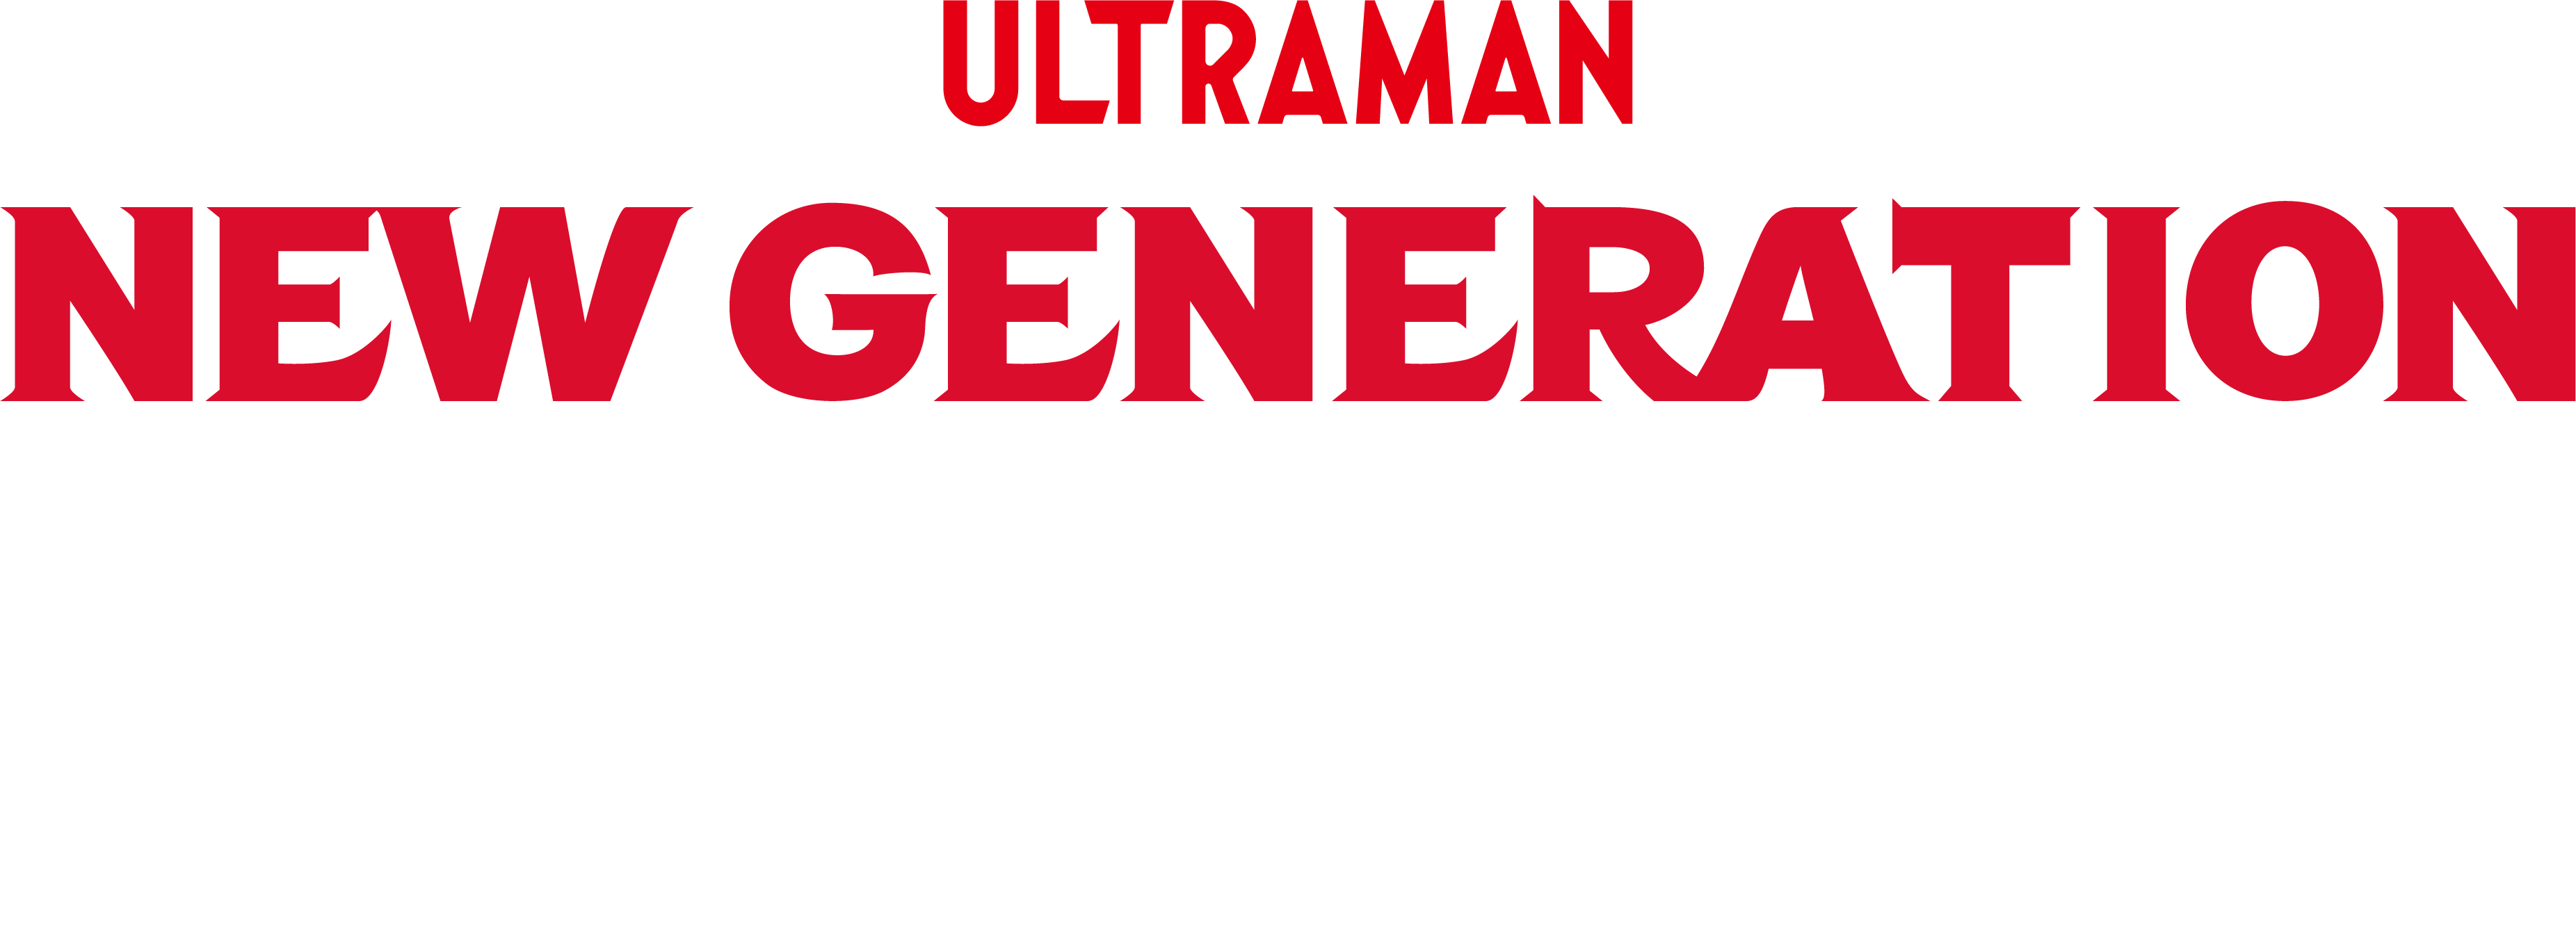 NEW GENERATION THE LIVE スターズ編 STAGE1 in 須賀川